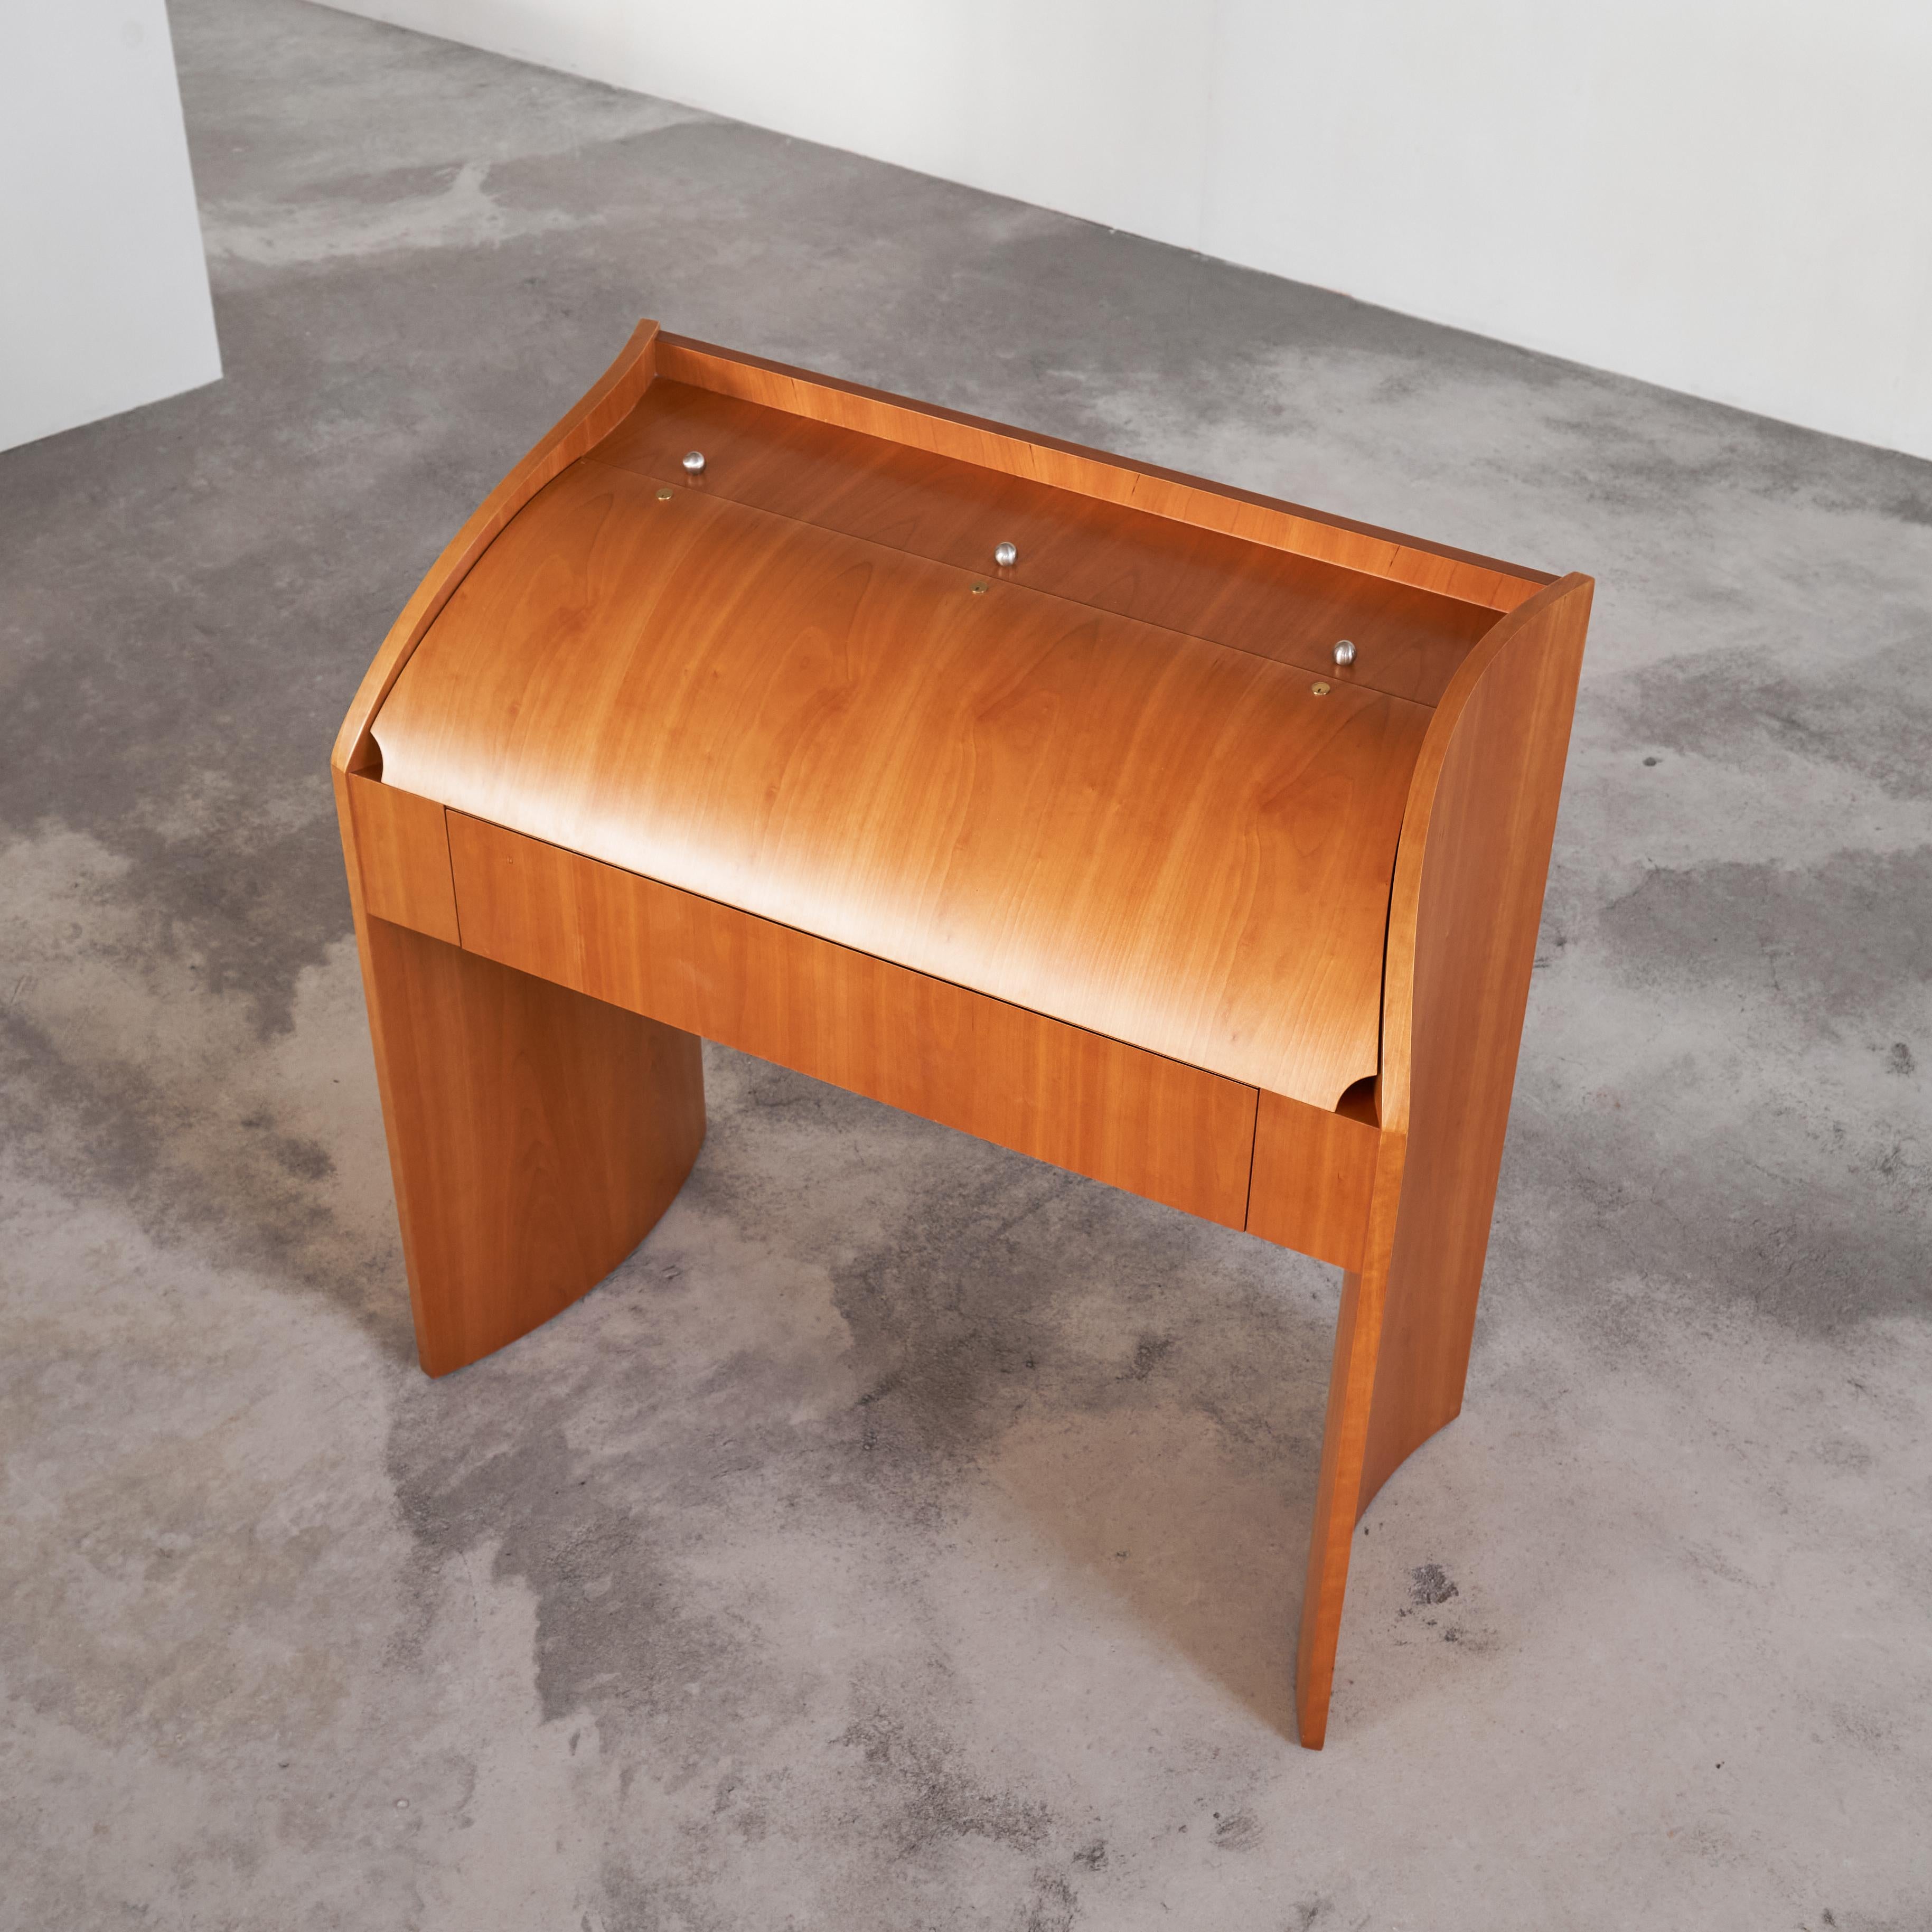 Unique Sculptural Secretary Desk in Maple 1990s.

This is a rare and very unique postmodern secretary desk with a sculptural design, made by a artisan craftsman somewhere in the 1990s. 

Great shapes and lines, making it a bit of a surrealist design